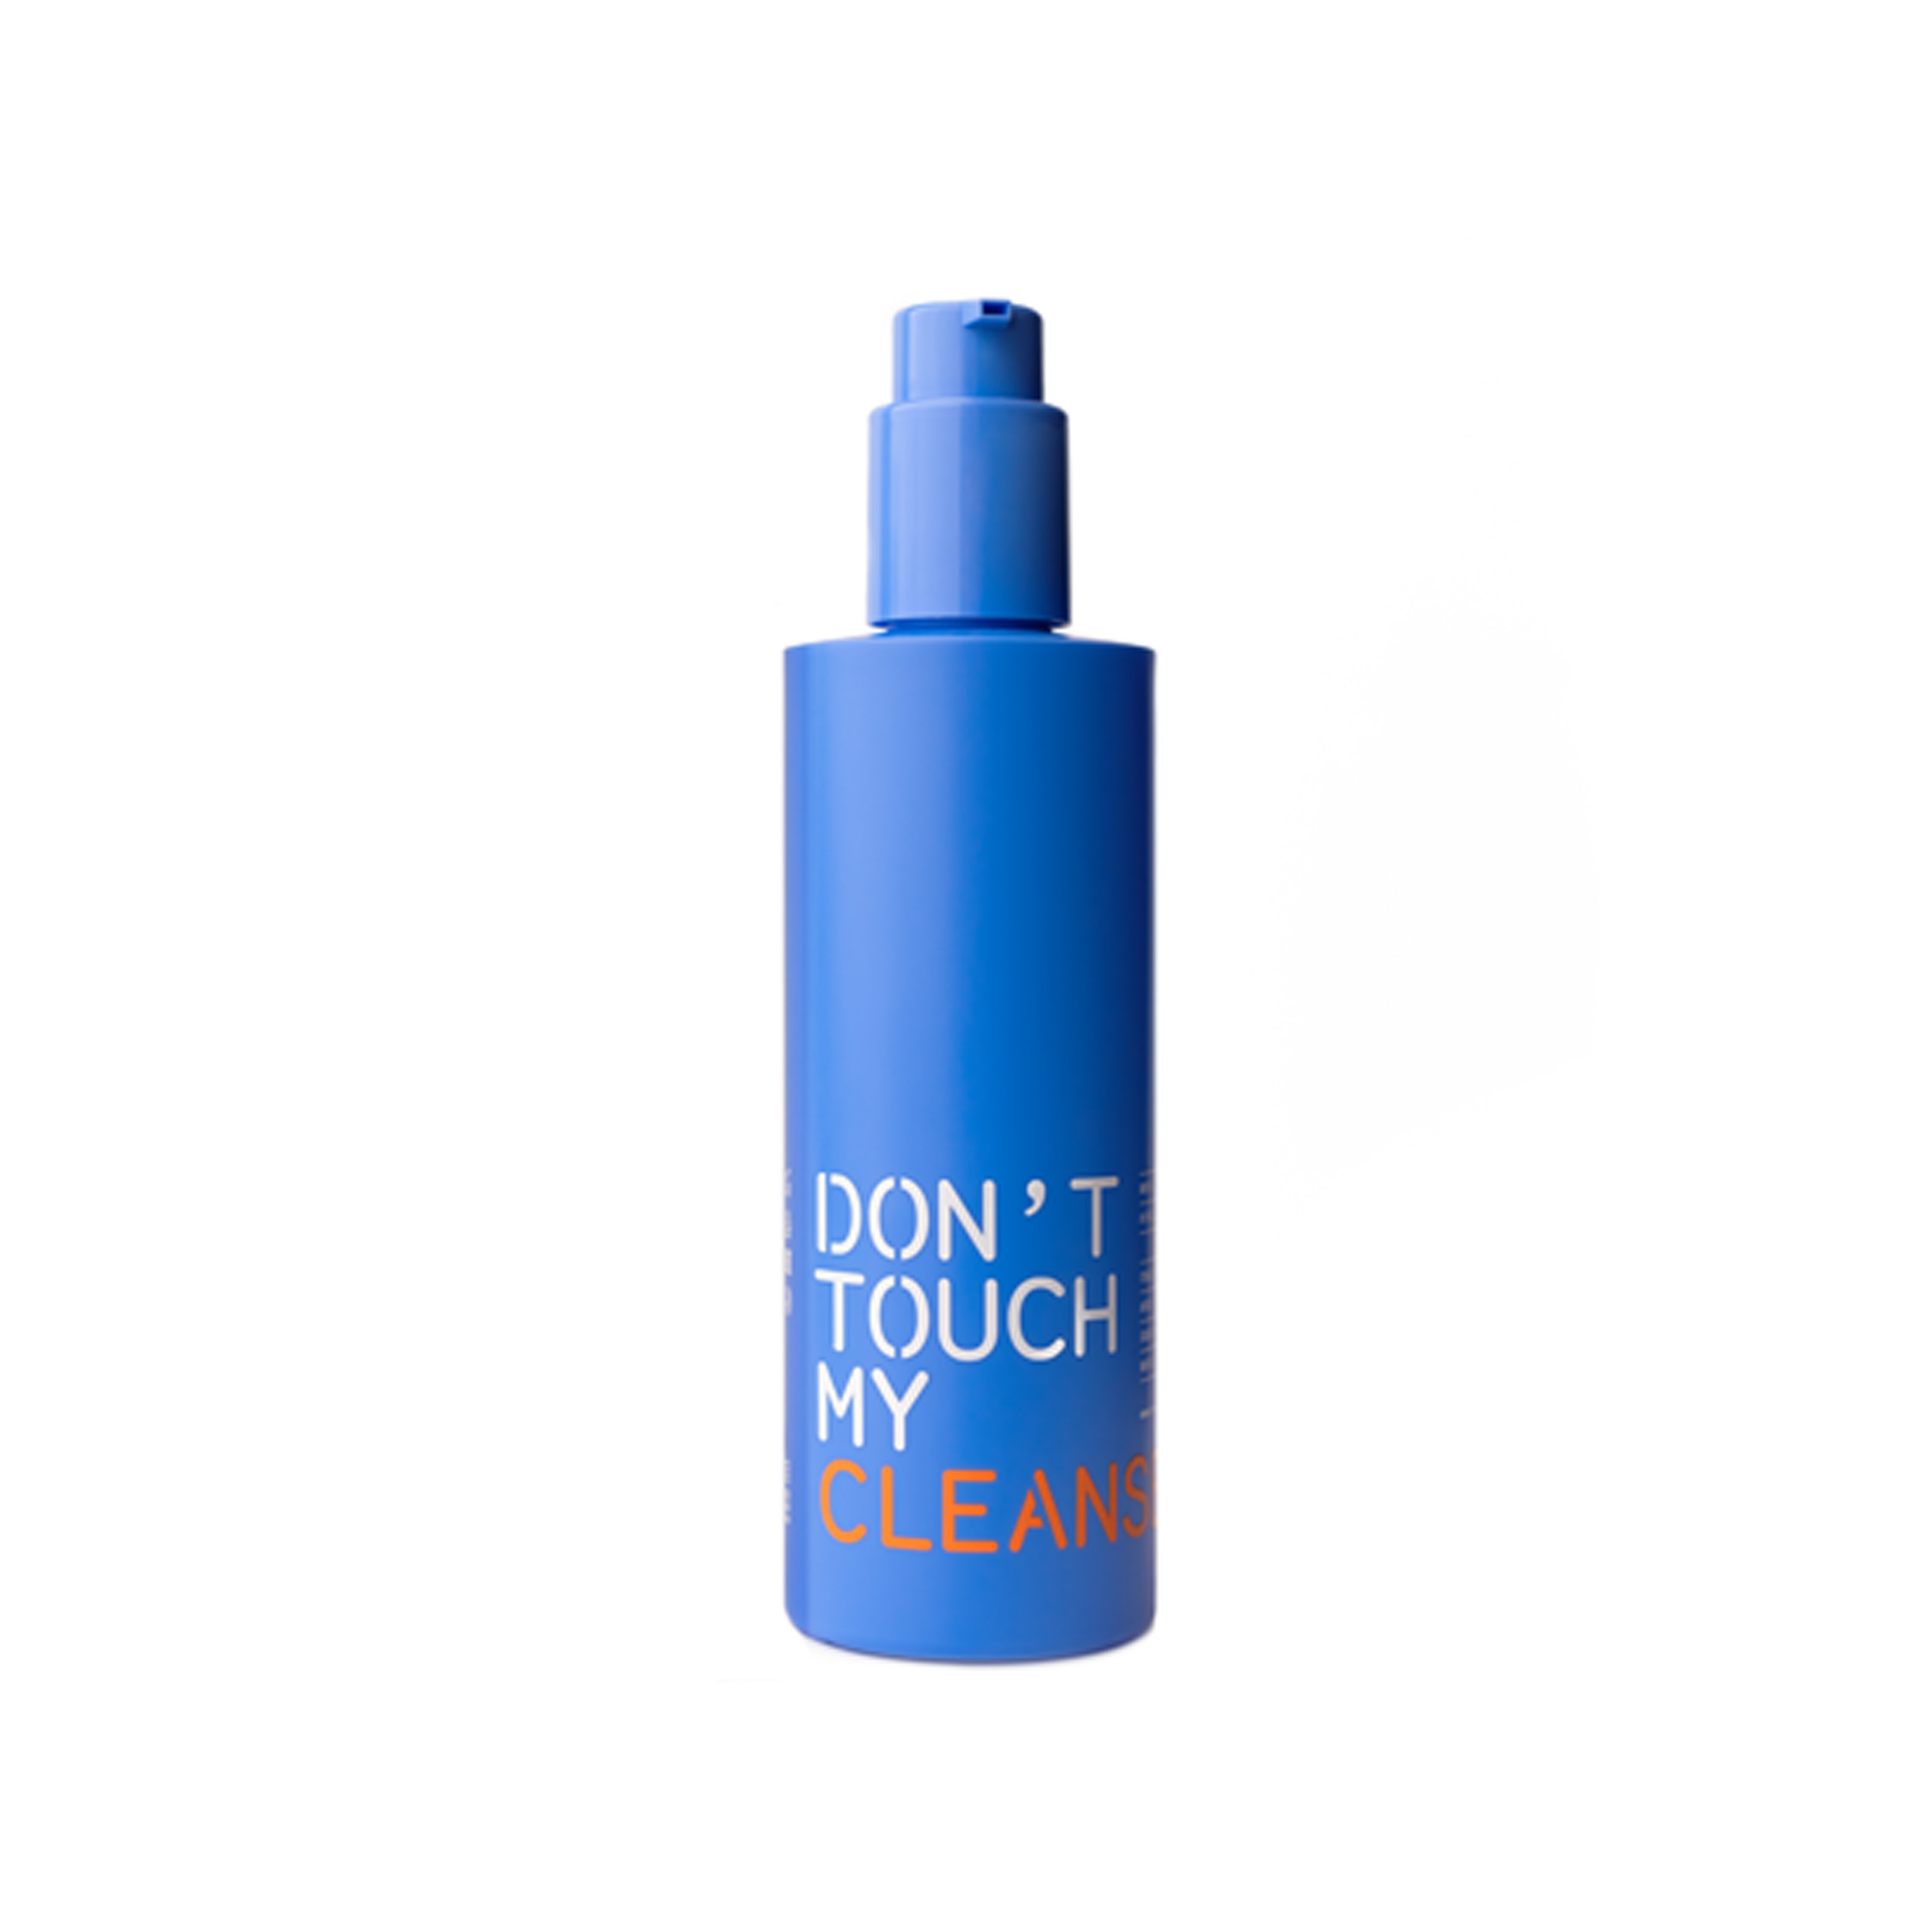 DON'T TOUCH MY SKIN DON'T TOUCH MY SKIN Гель для умывания 250 мл DNTCHMYCLEANSER250 - фото 1